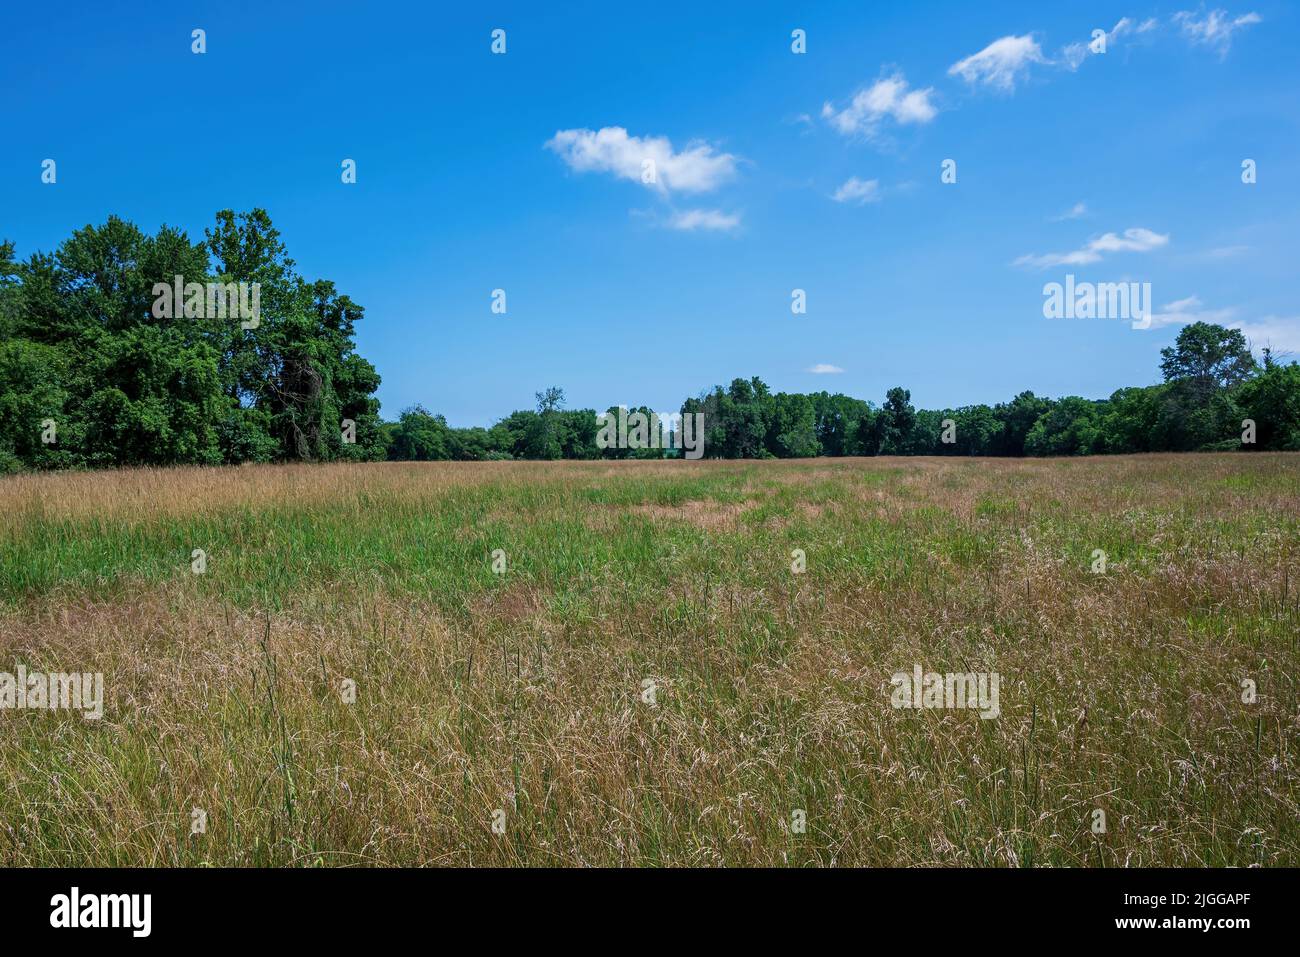 Grassland meadow bordered by trees. They are an open habitat, or field, vegetated by grasses, herbs, or non-woody plants. Stock Photo